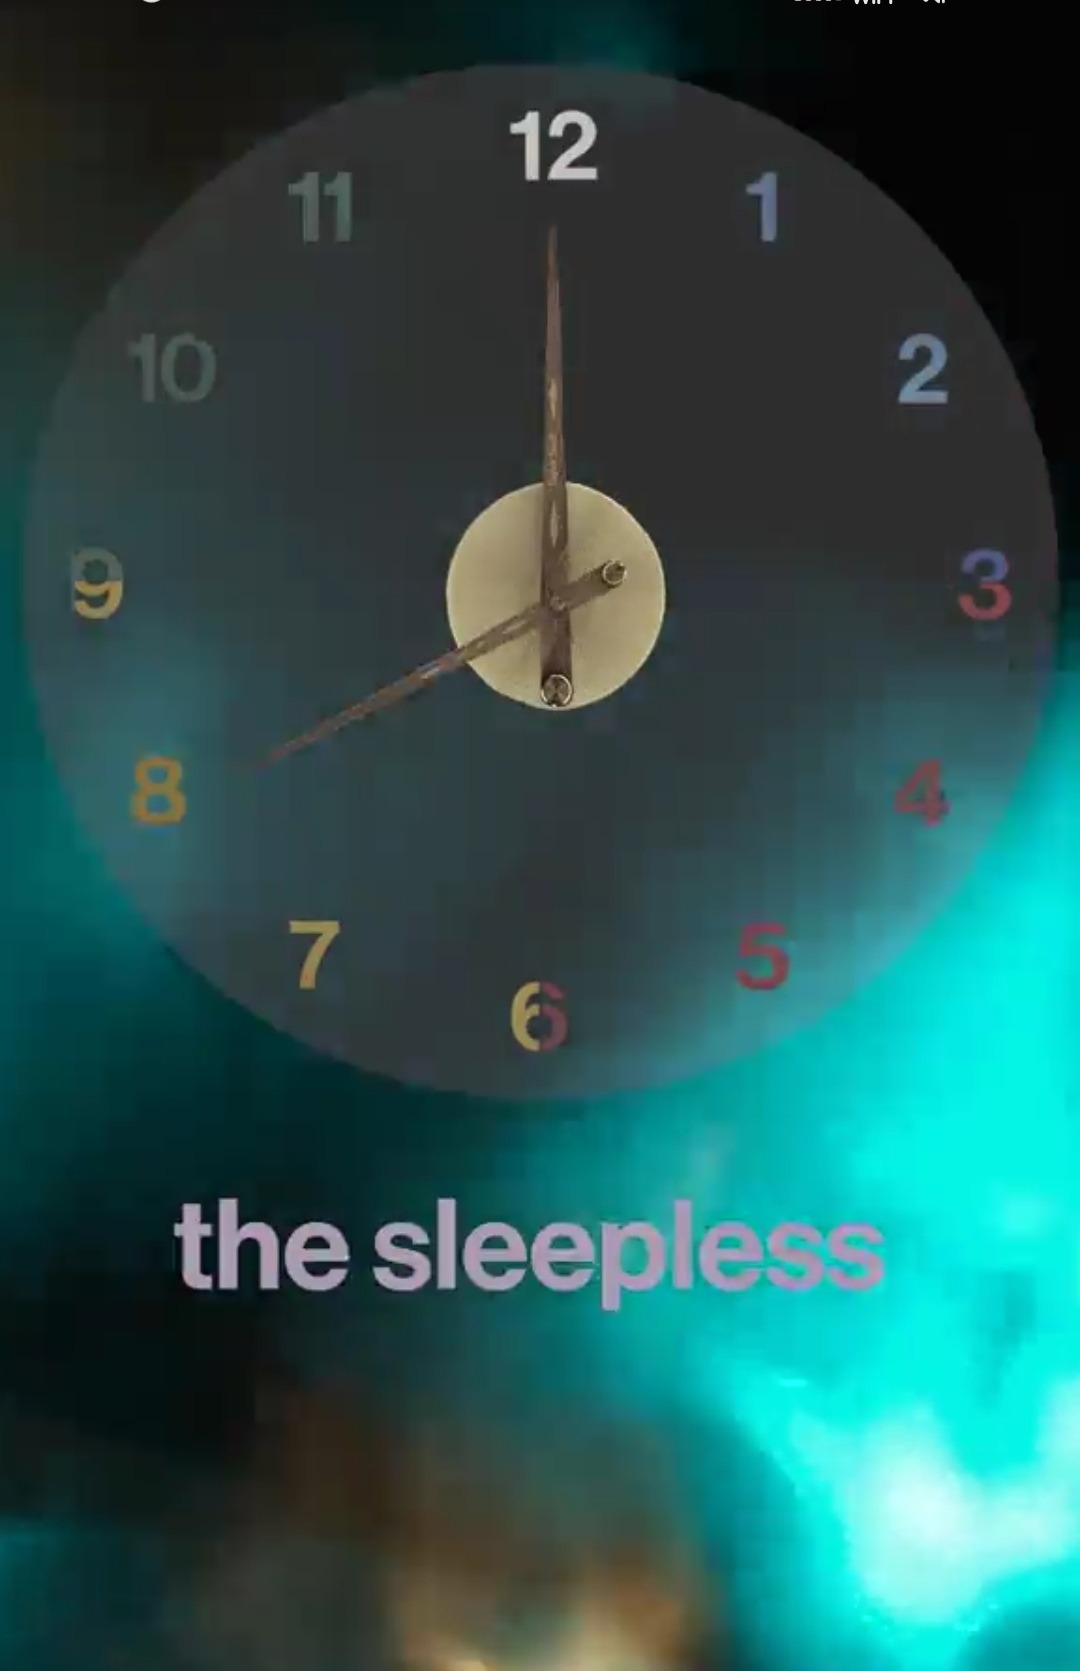 all spotify background videos changing to a clock...